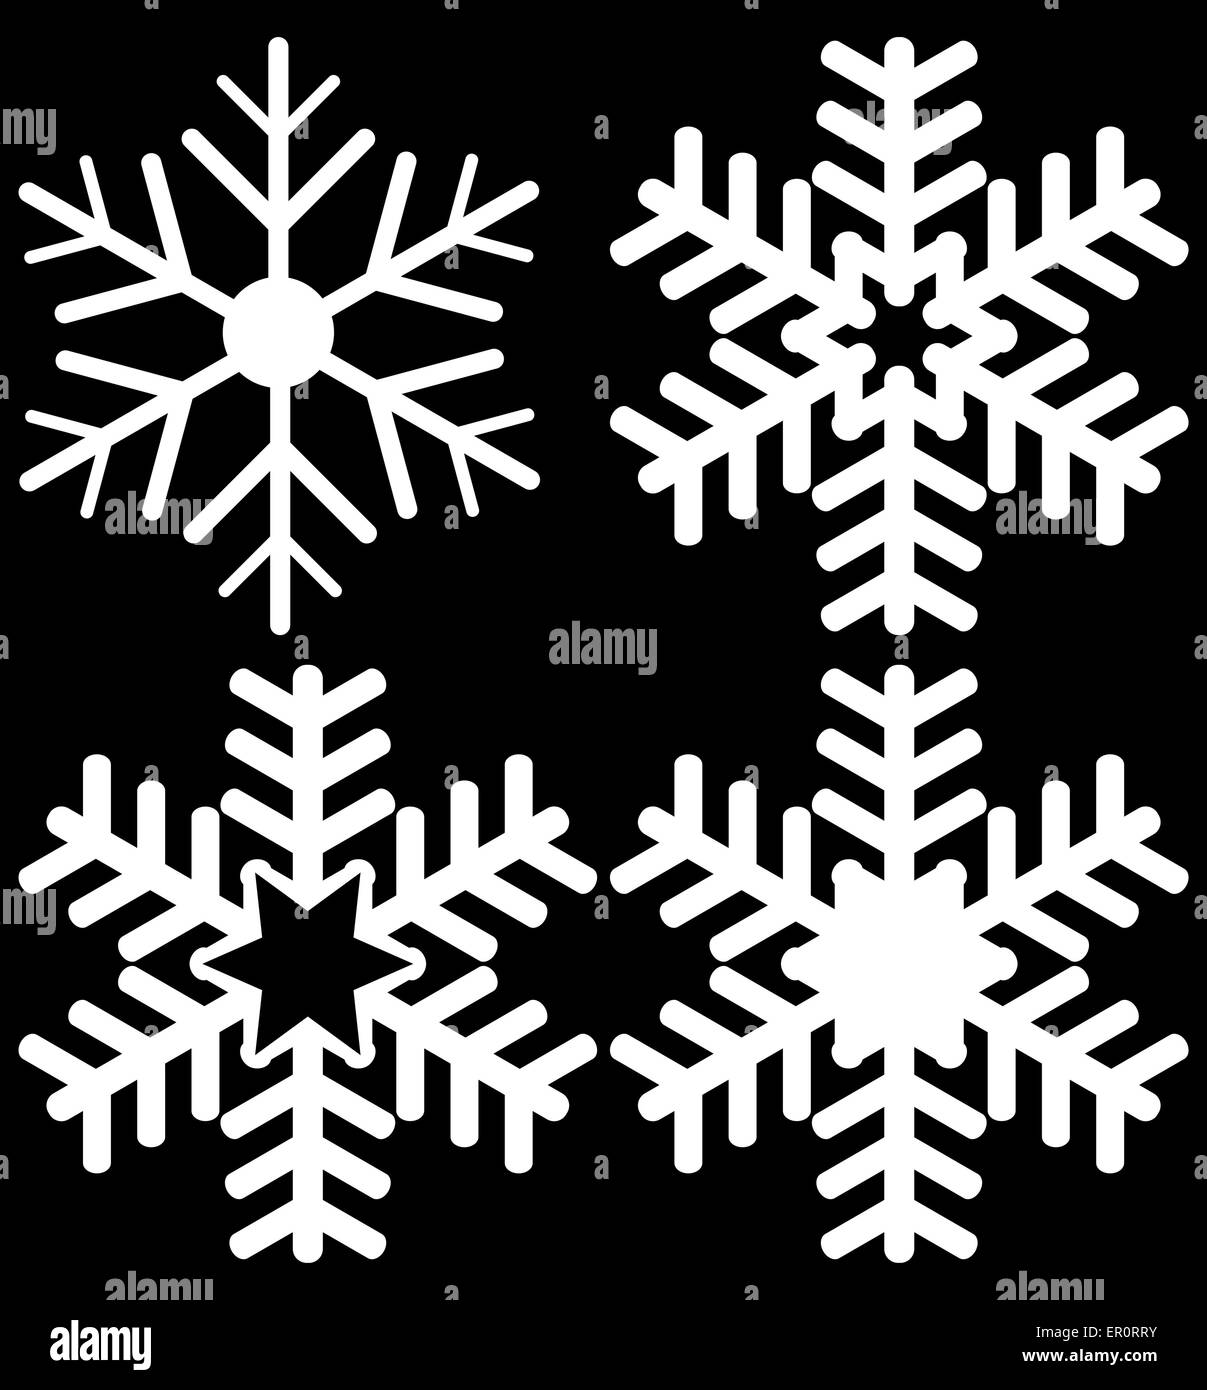 Set of White Snowflakes on a Black Background Stock Vector